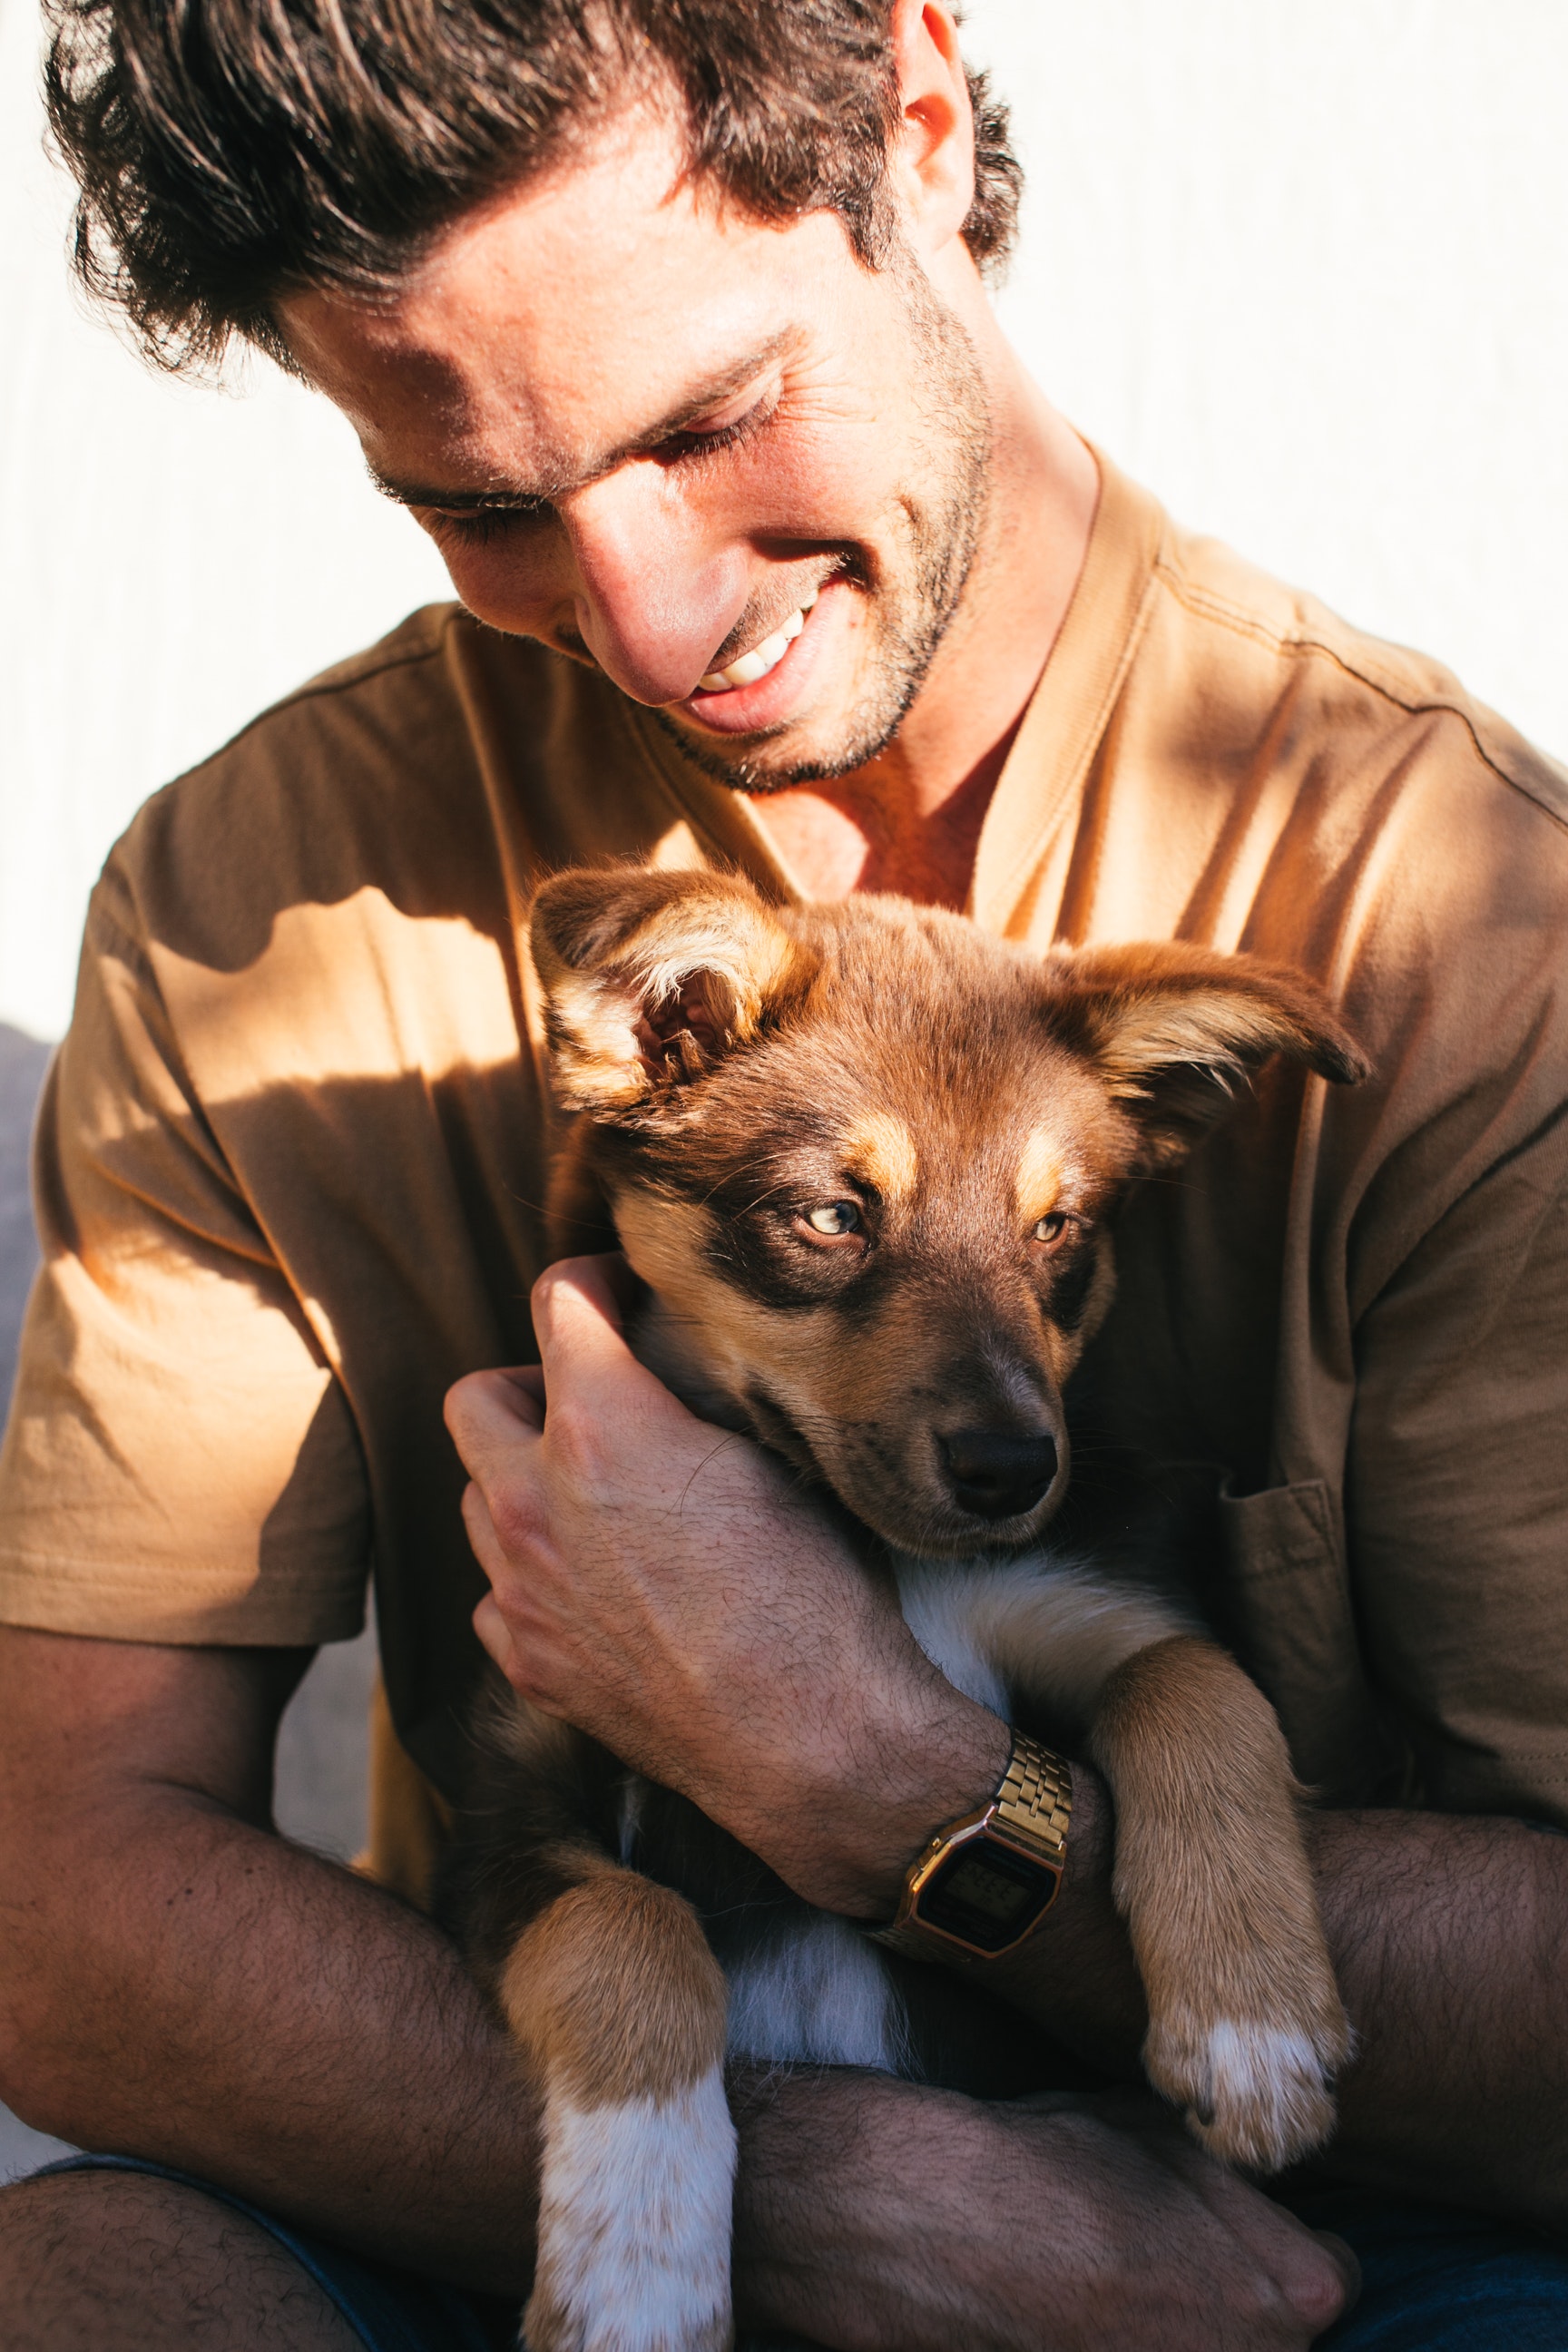 guy holding a puppy